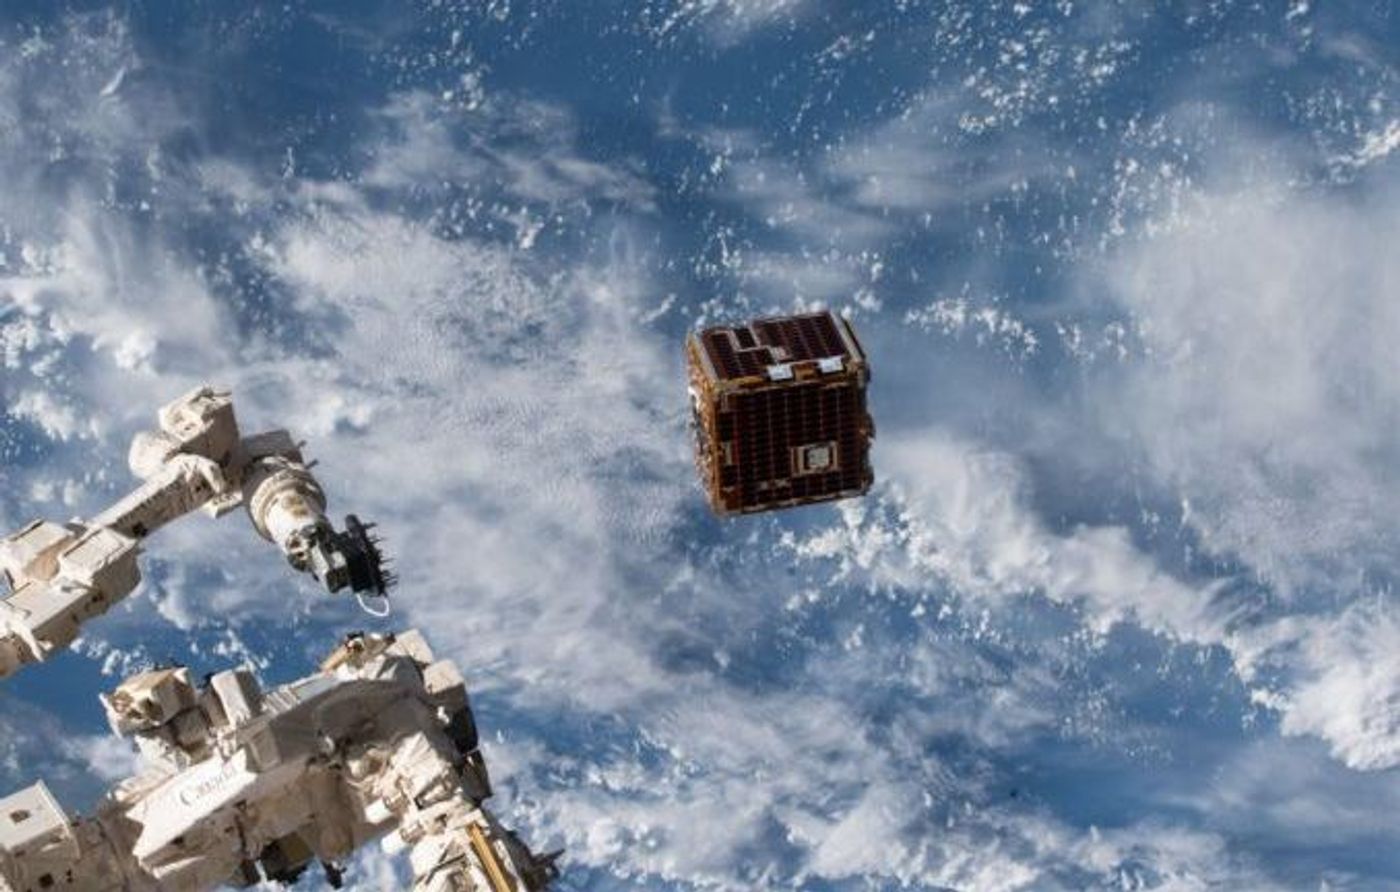 Here we see the RemoveDebris satellite ejecting from the International Space Station.